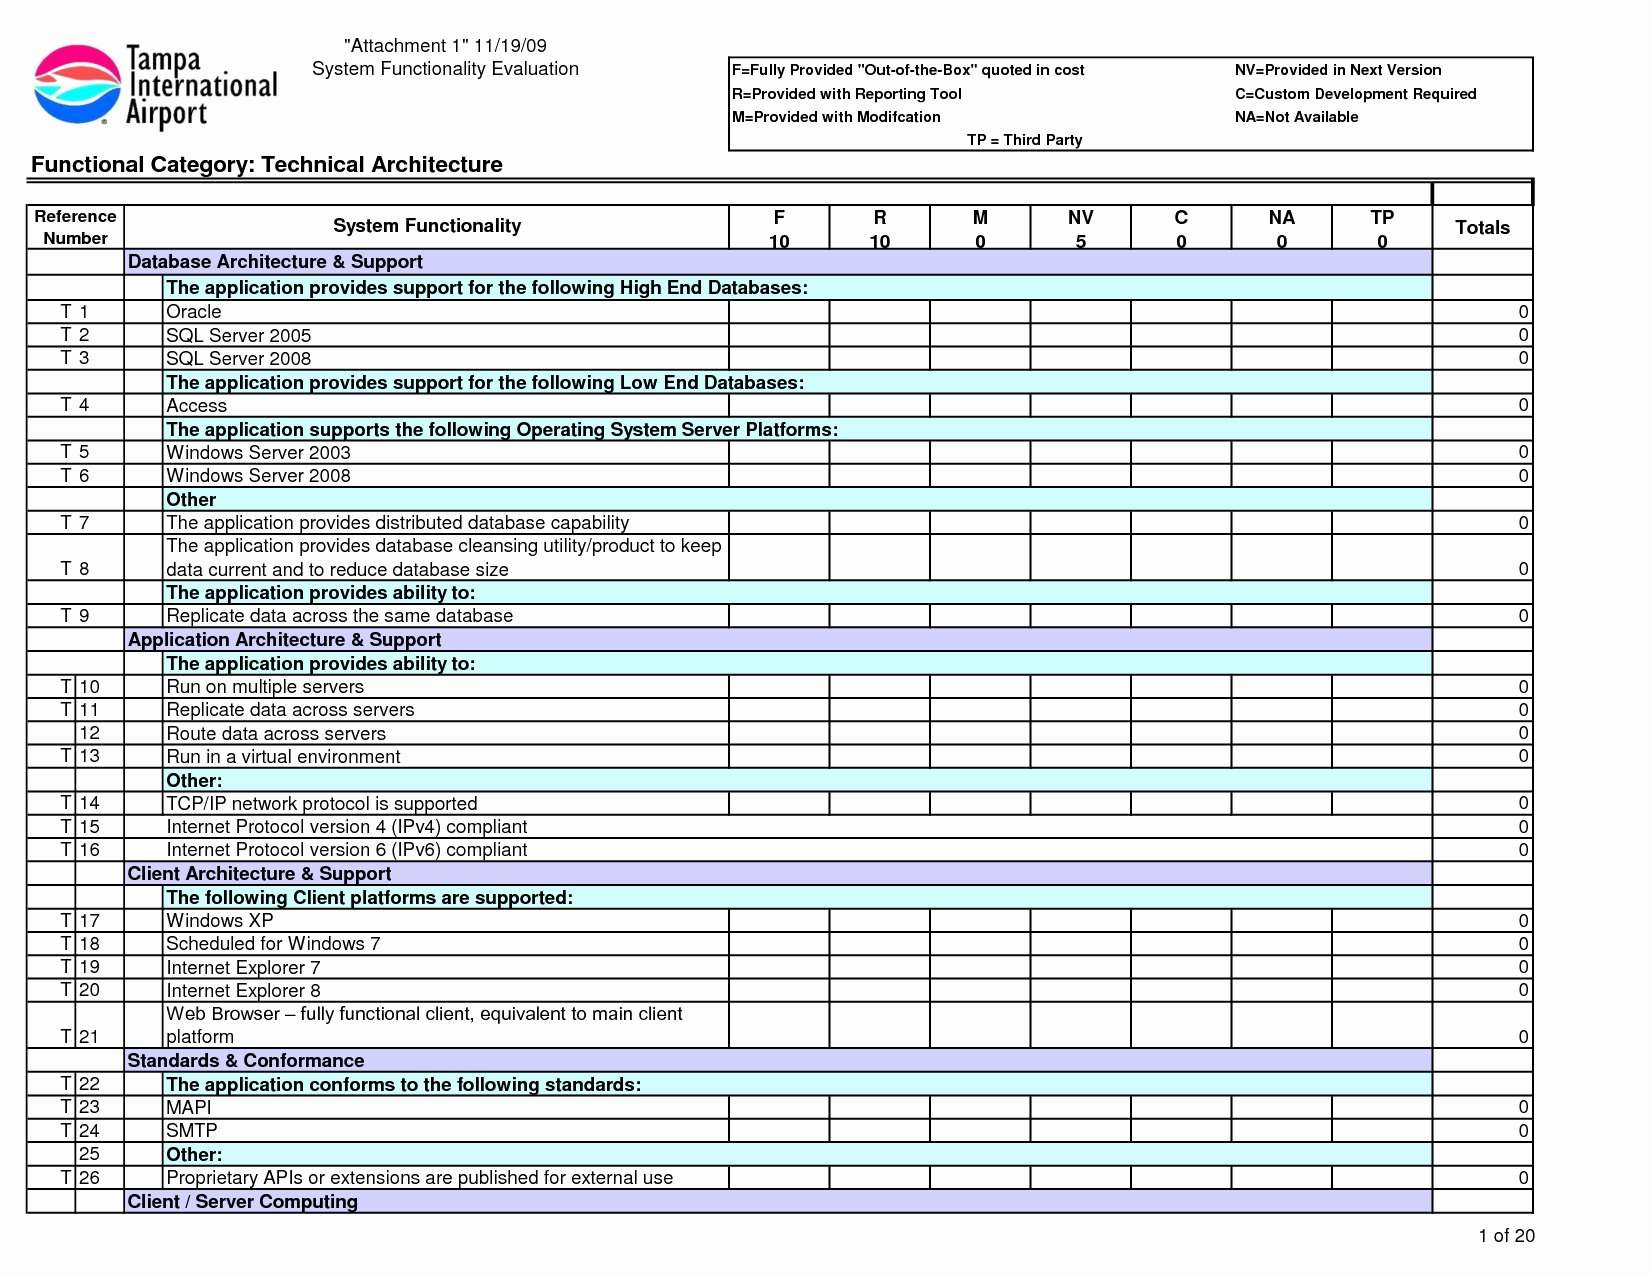 Maintenance Work order Template Excel Awesome 27 Of Template Spreadsheet for Maintenance